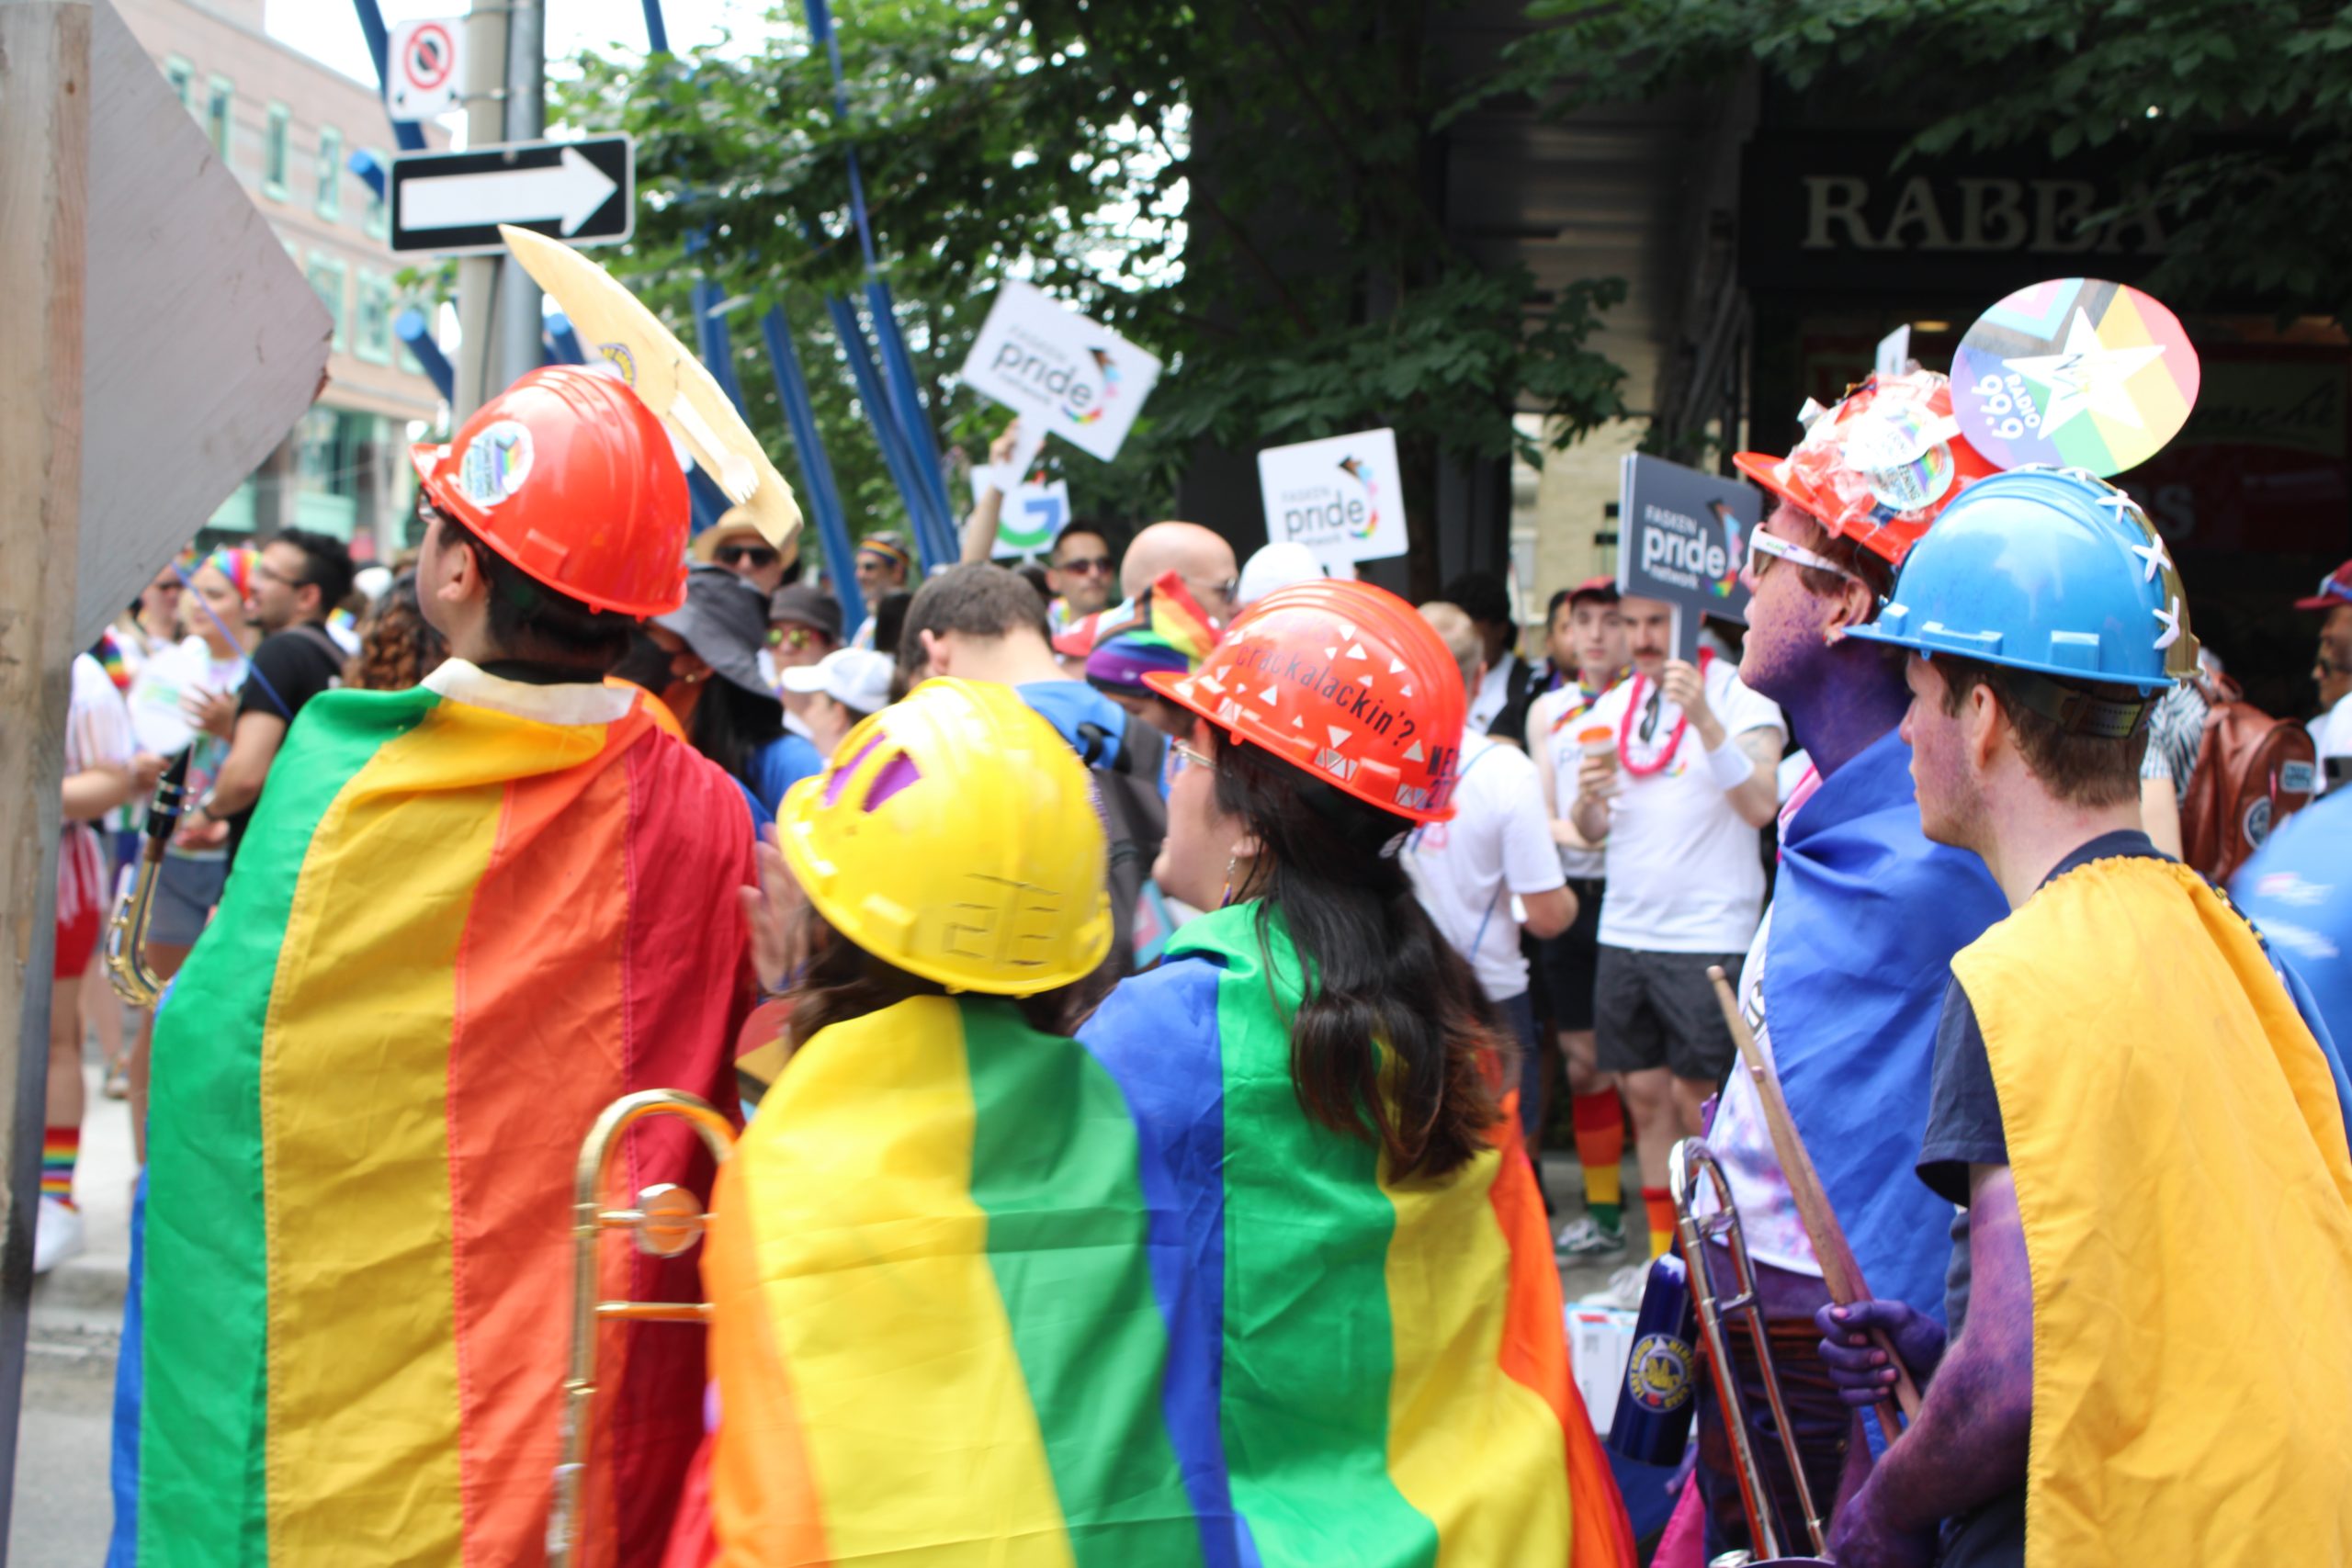 Engineering students wearing hard hats and pride flags during the 2023 Pride Parade. Photo by Lily Kim and Emaan Fatima